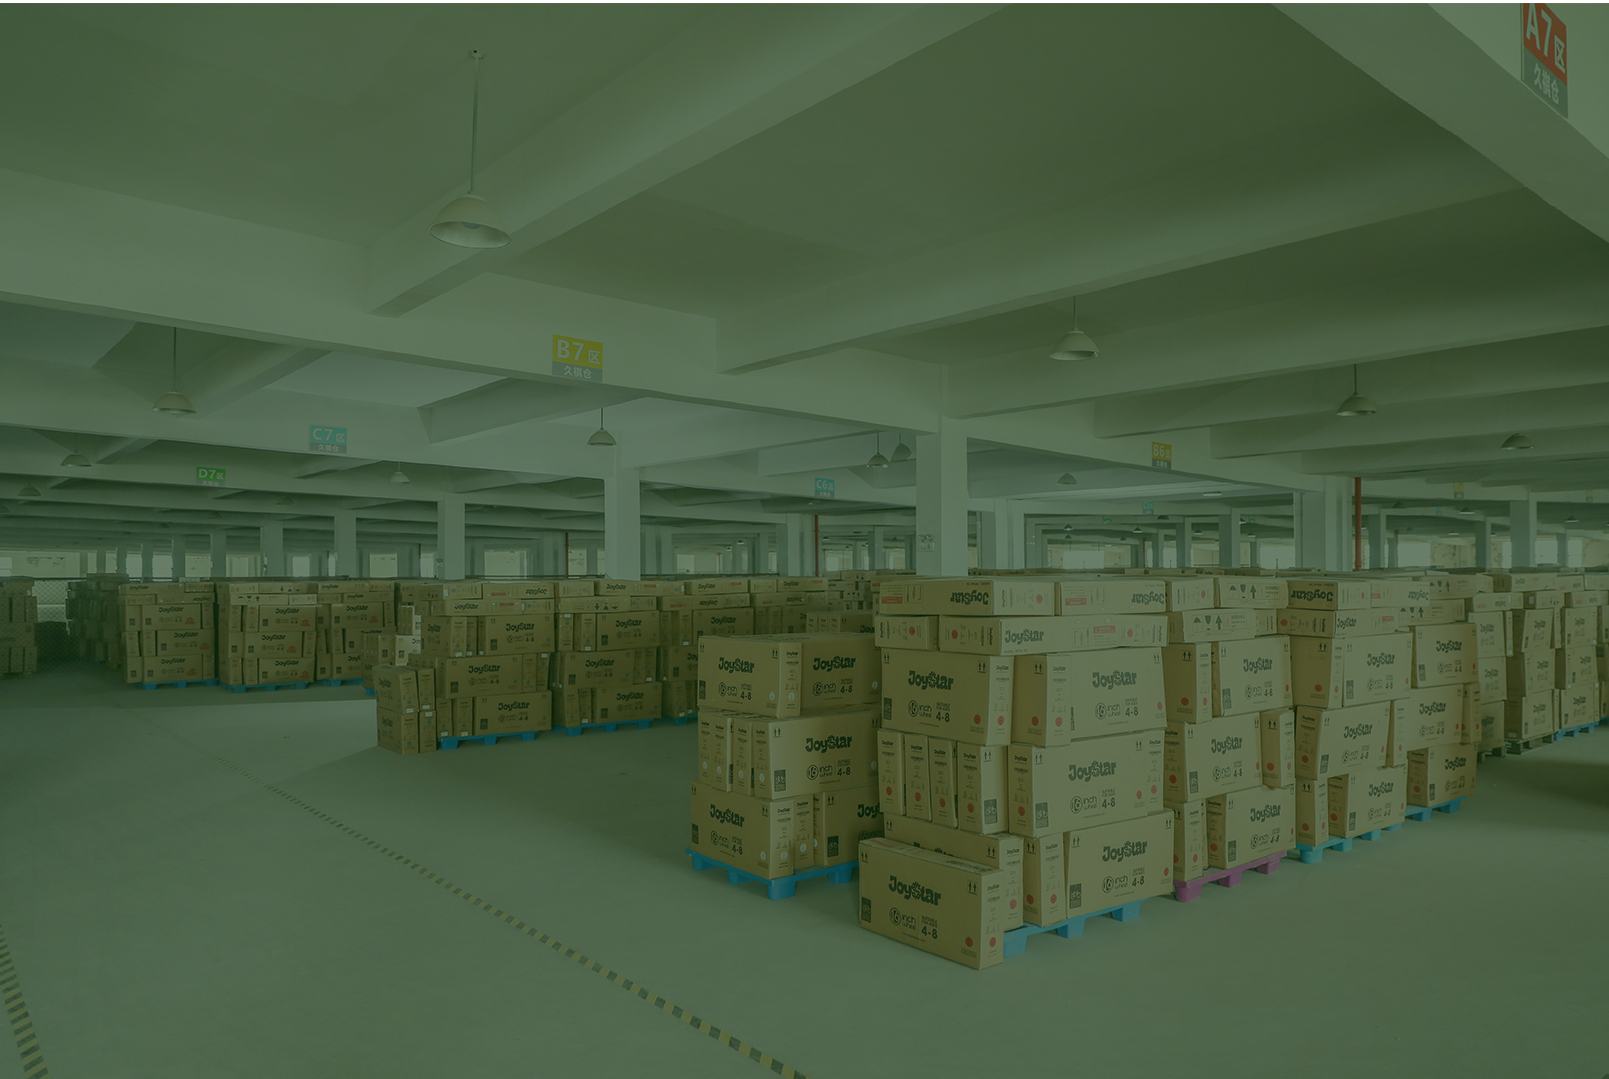 Warehousing and sorting industry